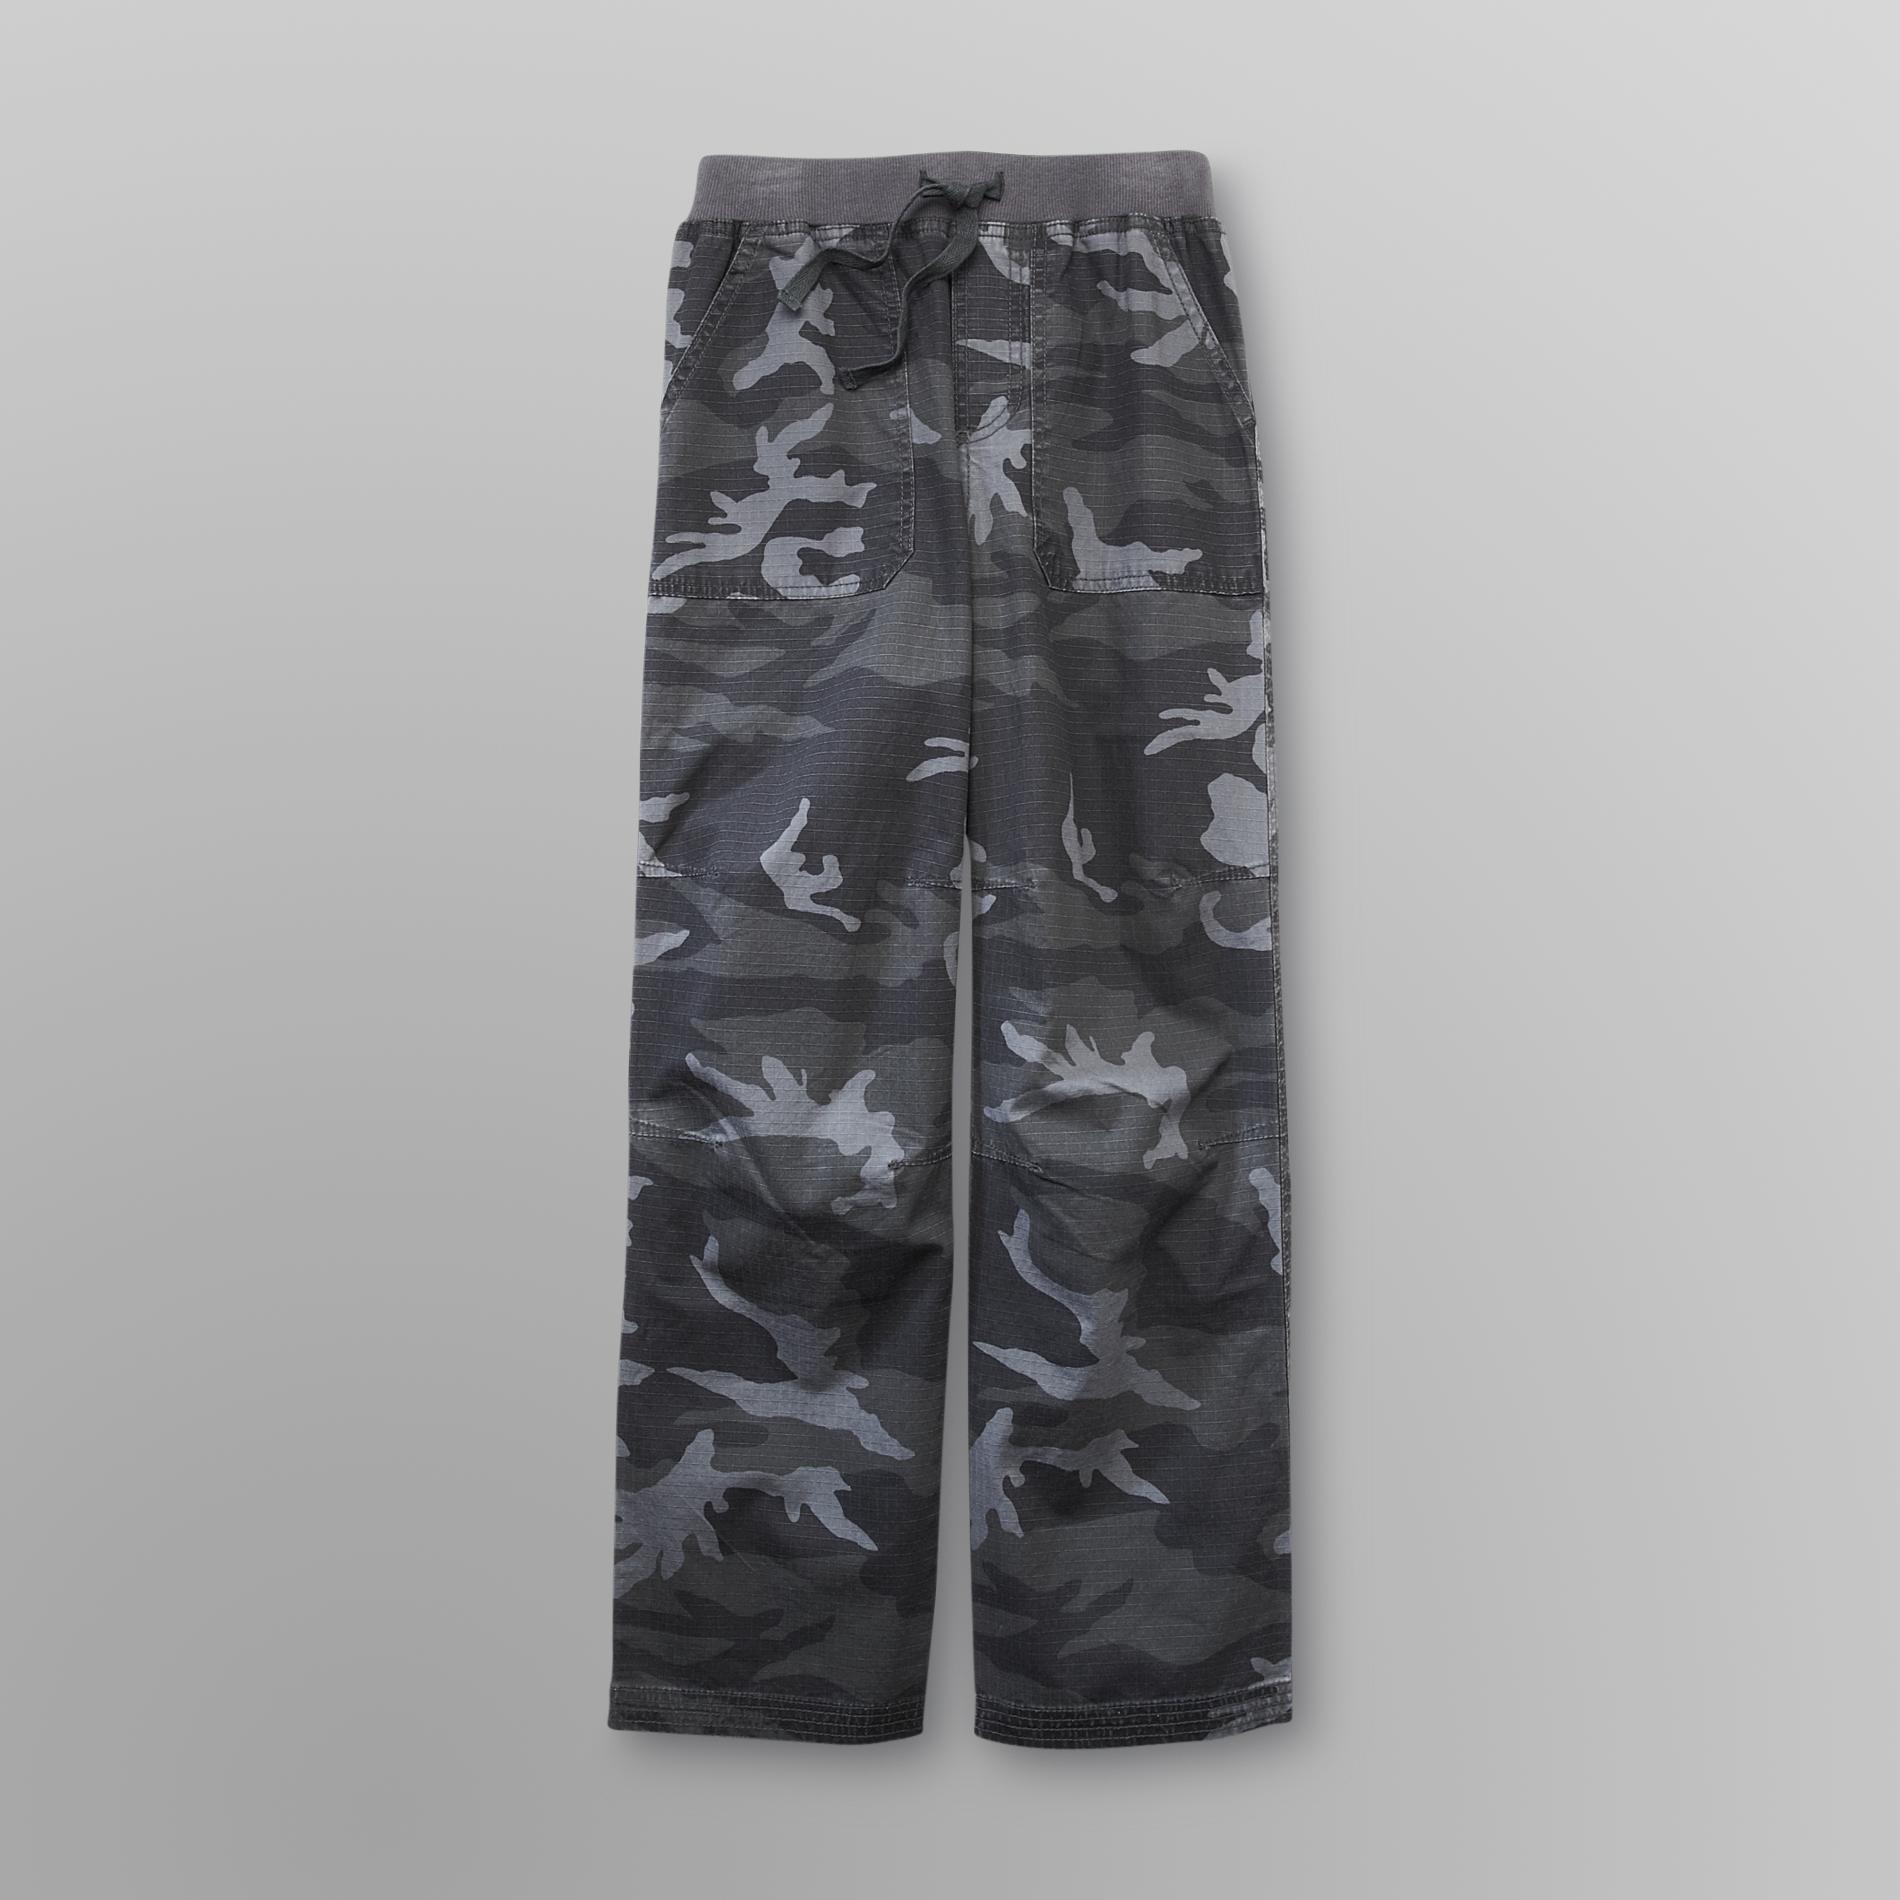 Basic Editions Boy's Ripstop Pants - Camouflage